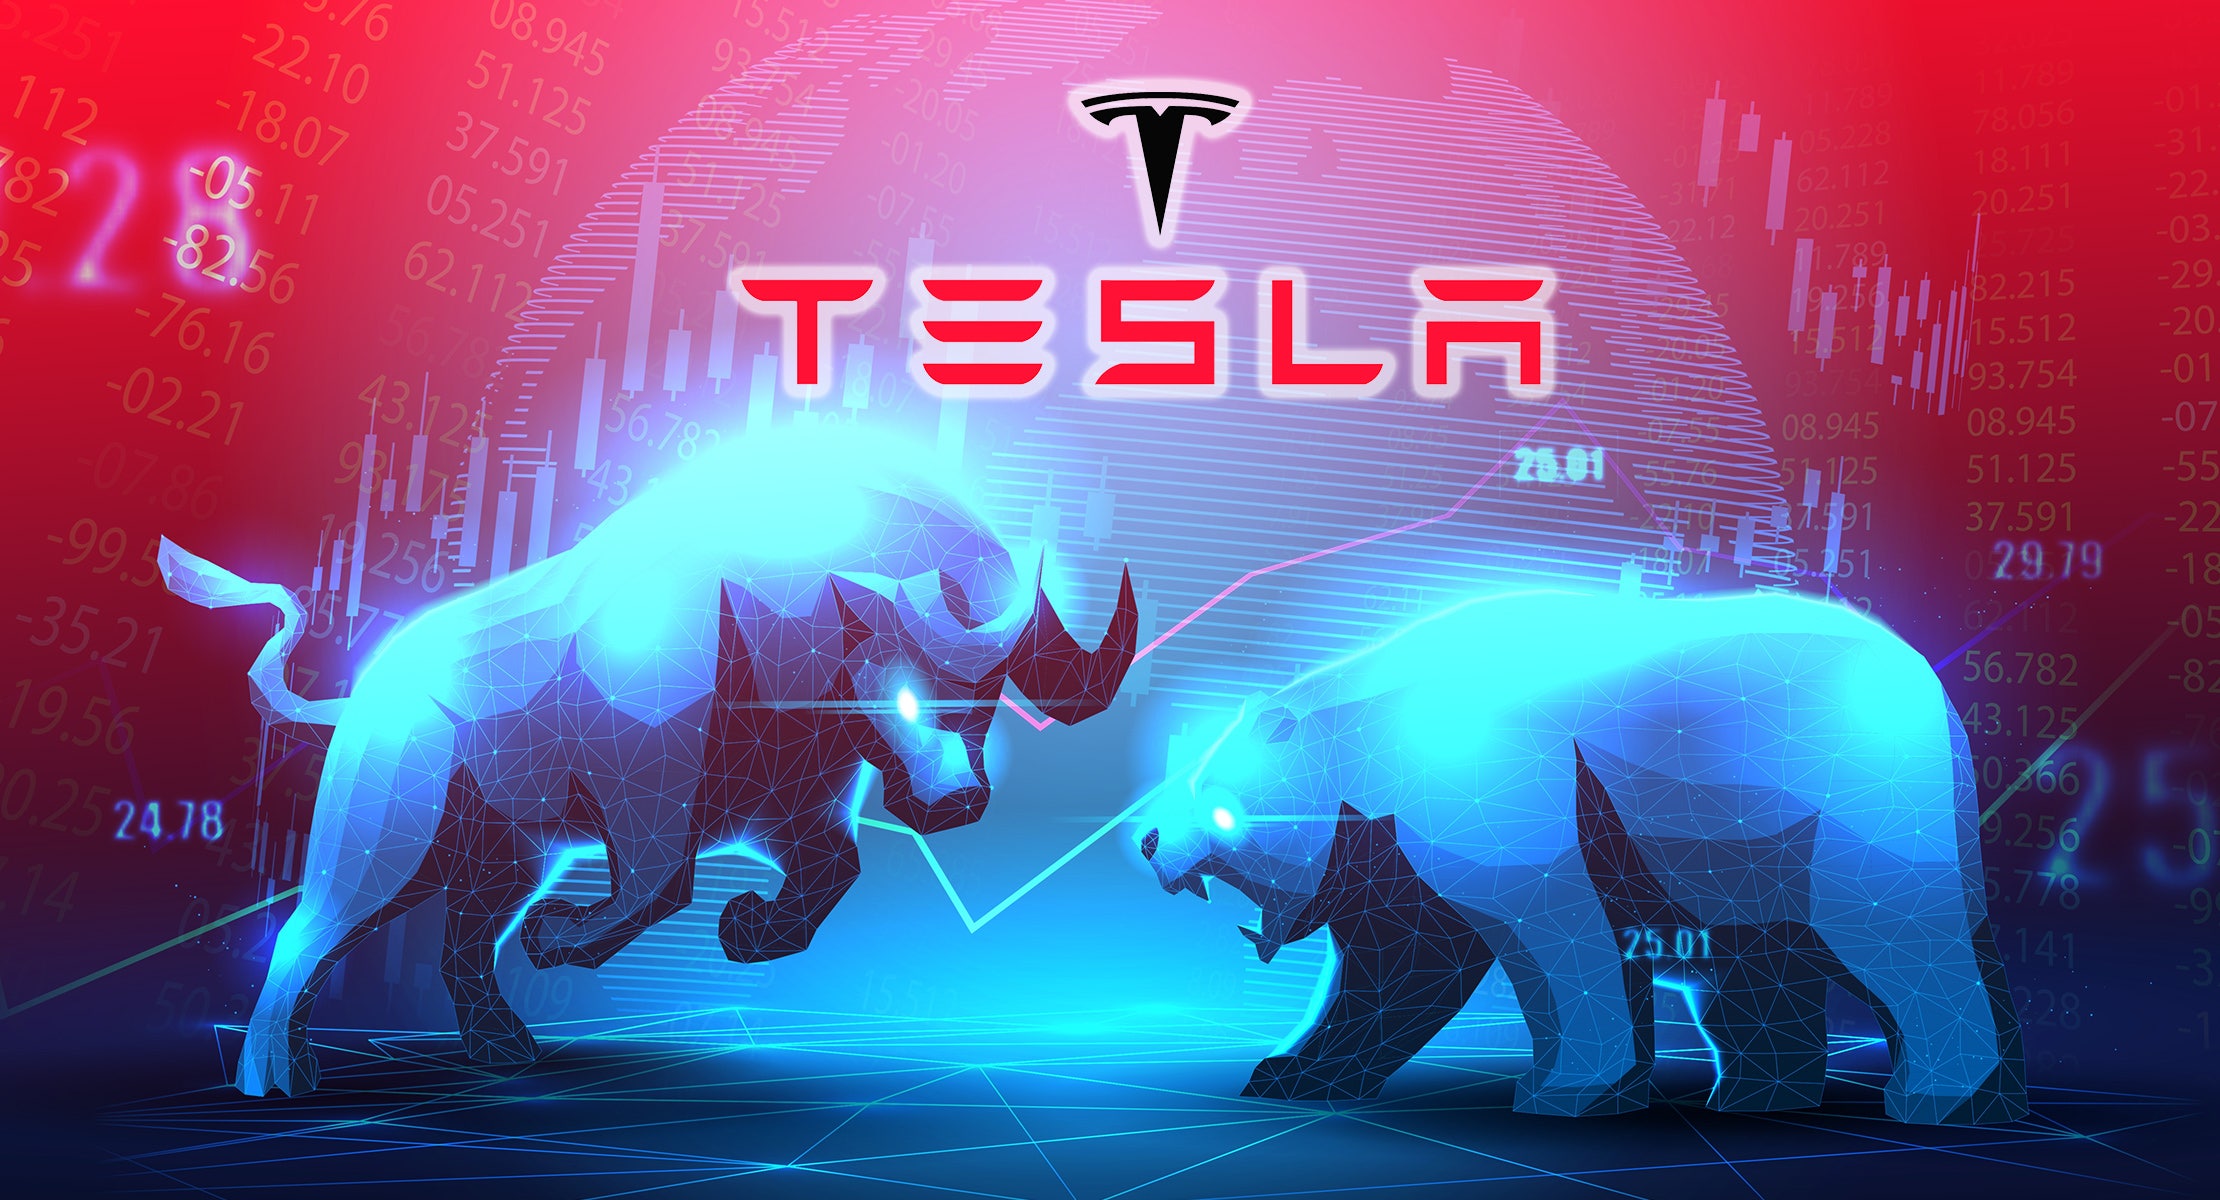 Is Tesla Signaling A Comeback For Growth Stocks?